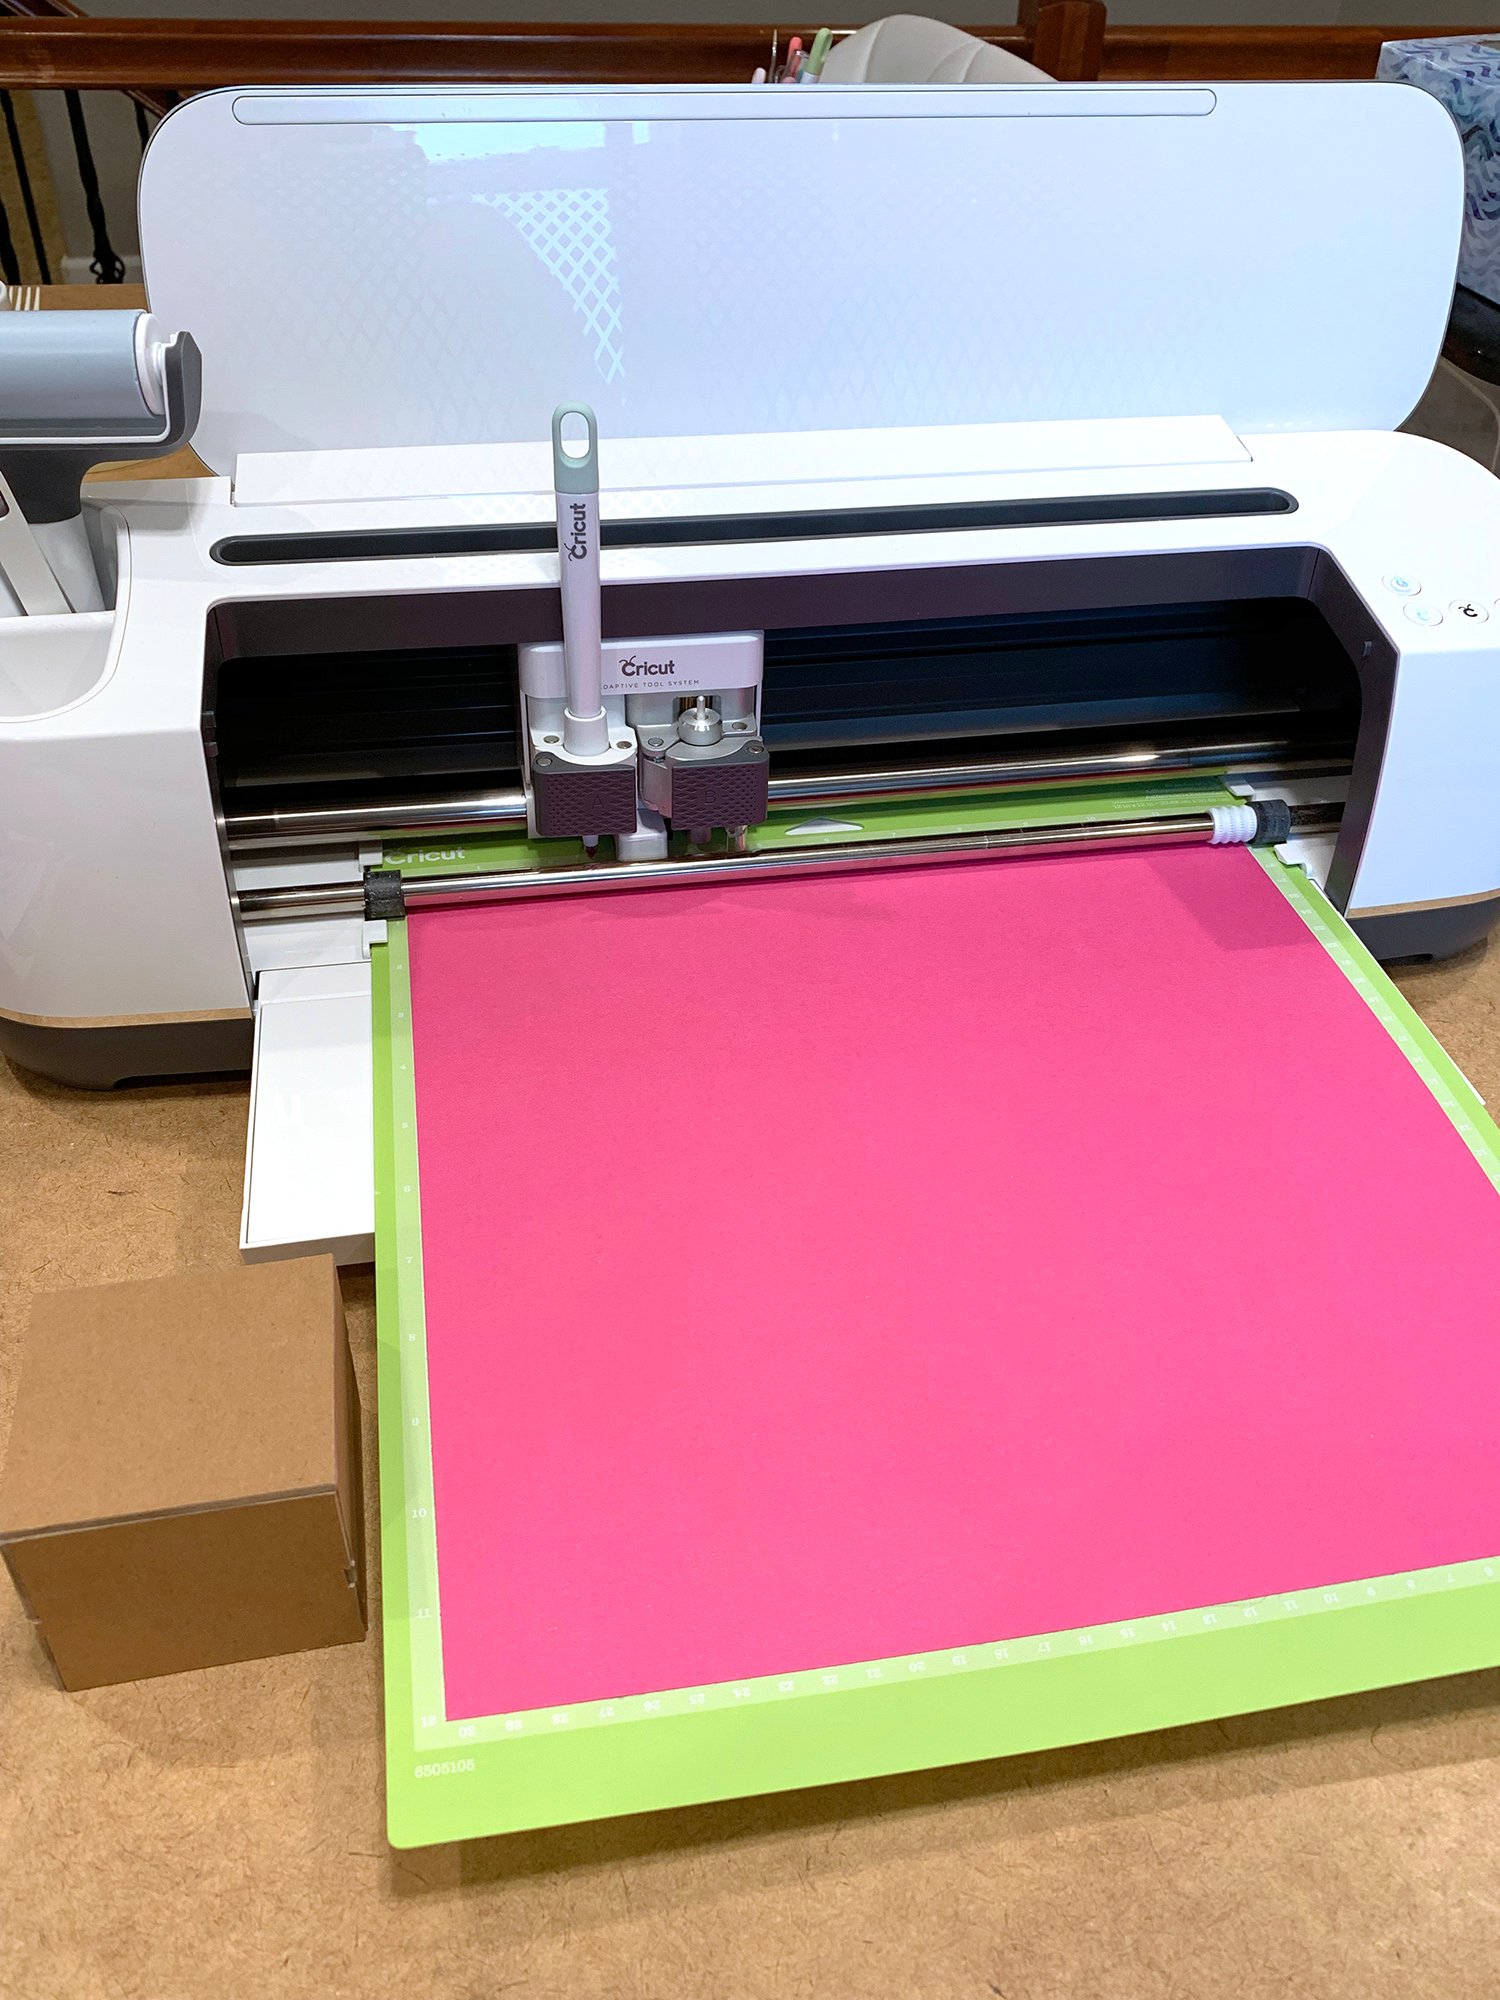 cricut maker with pink cardstock 